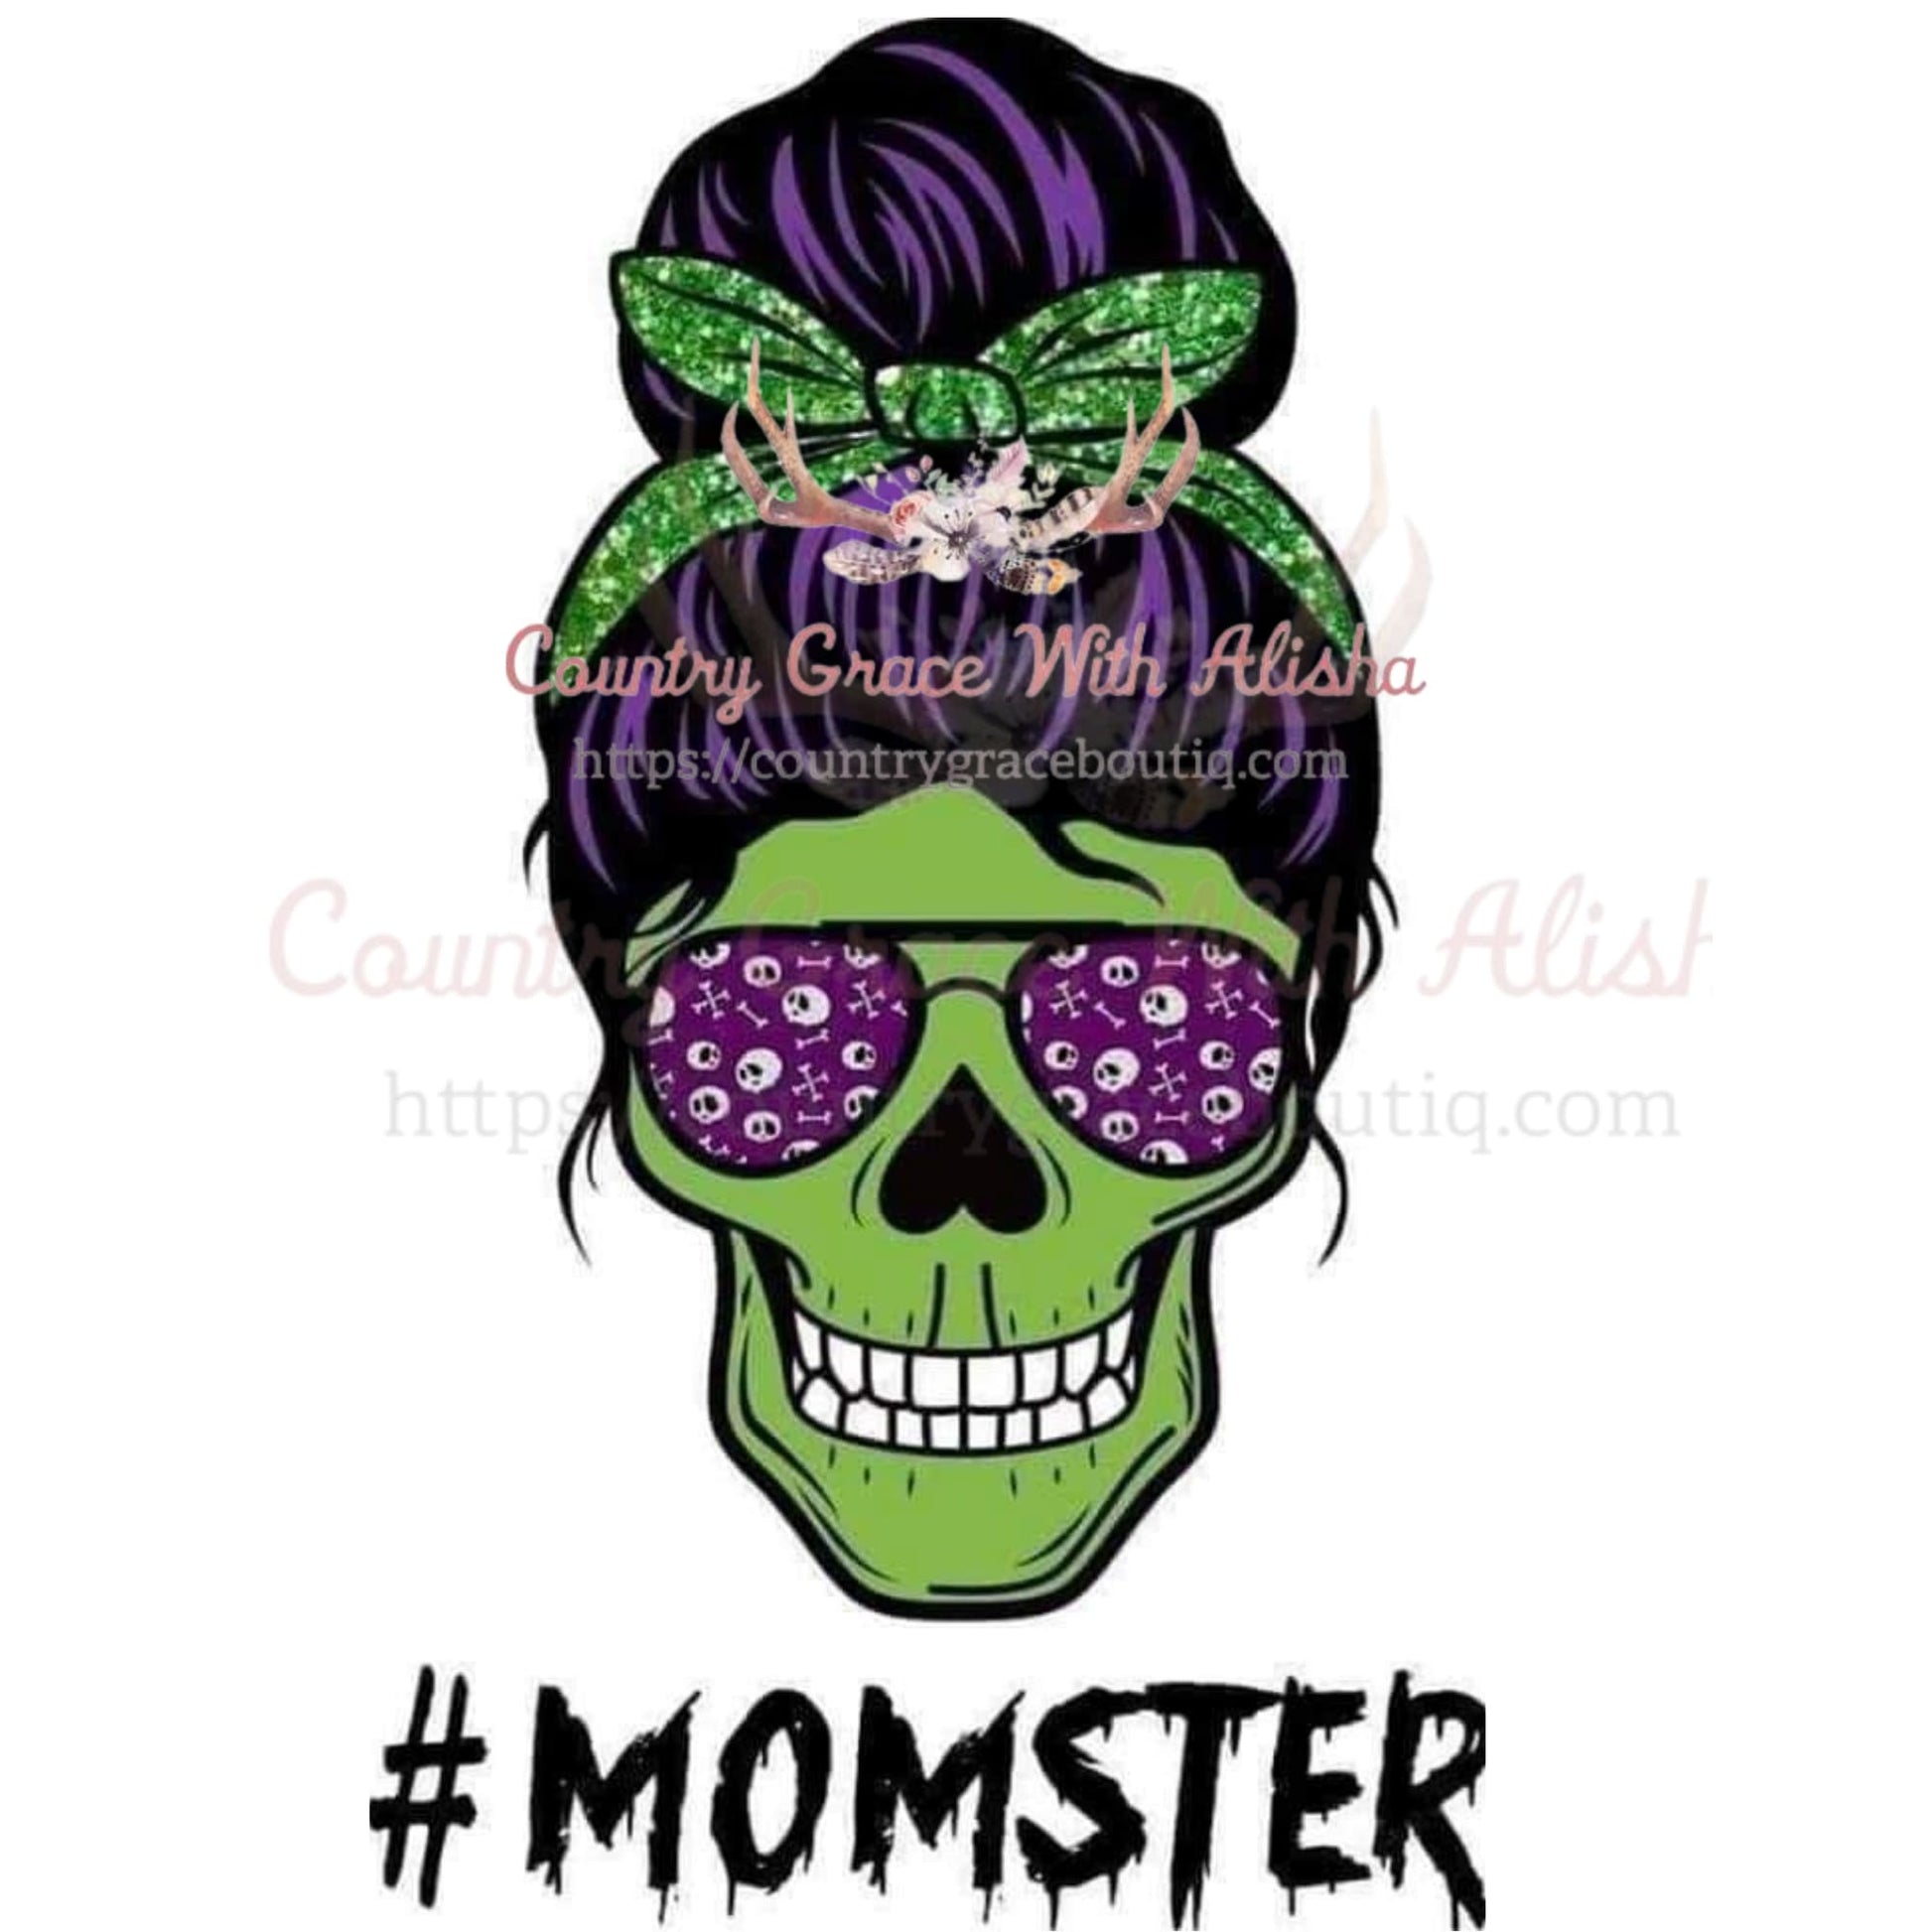 Momster Skull Sublimation Transfer - Sub $1.50 Country Grace